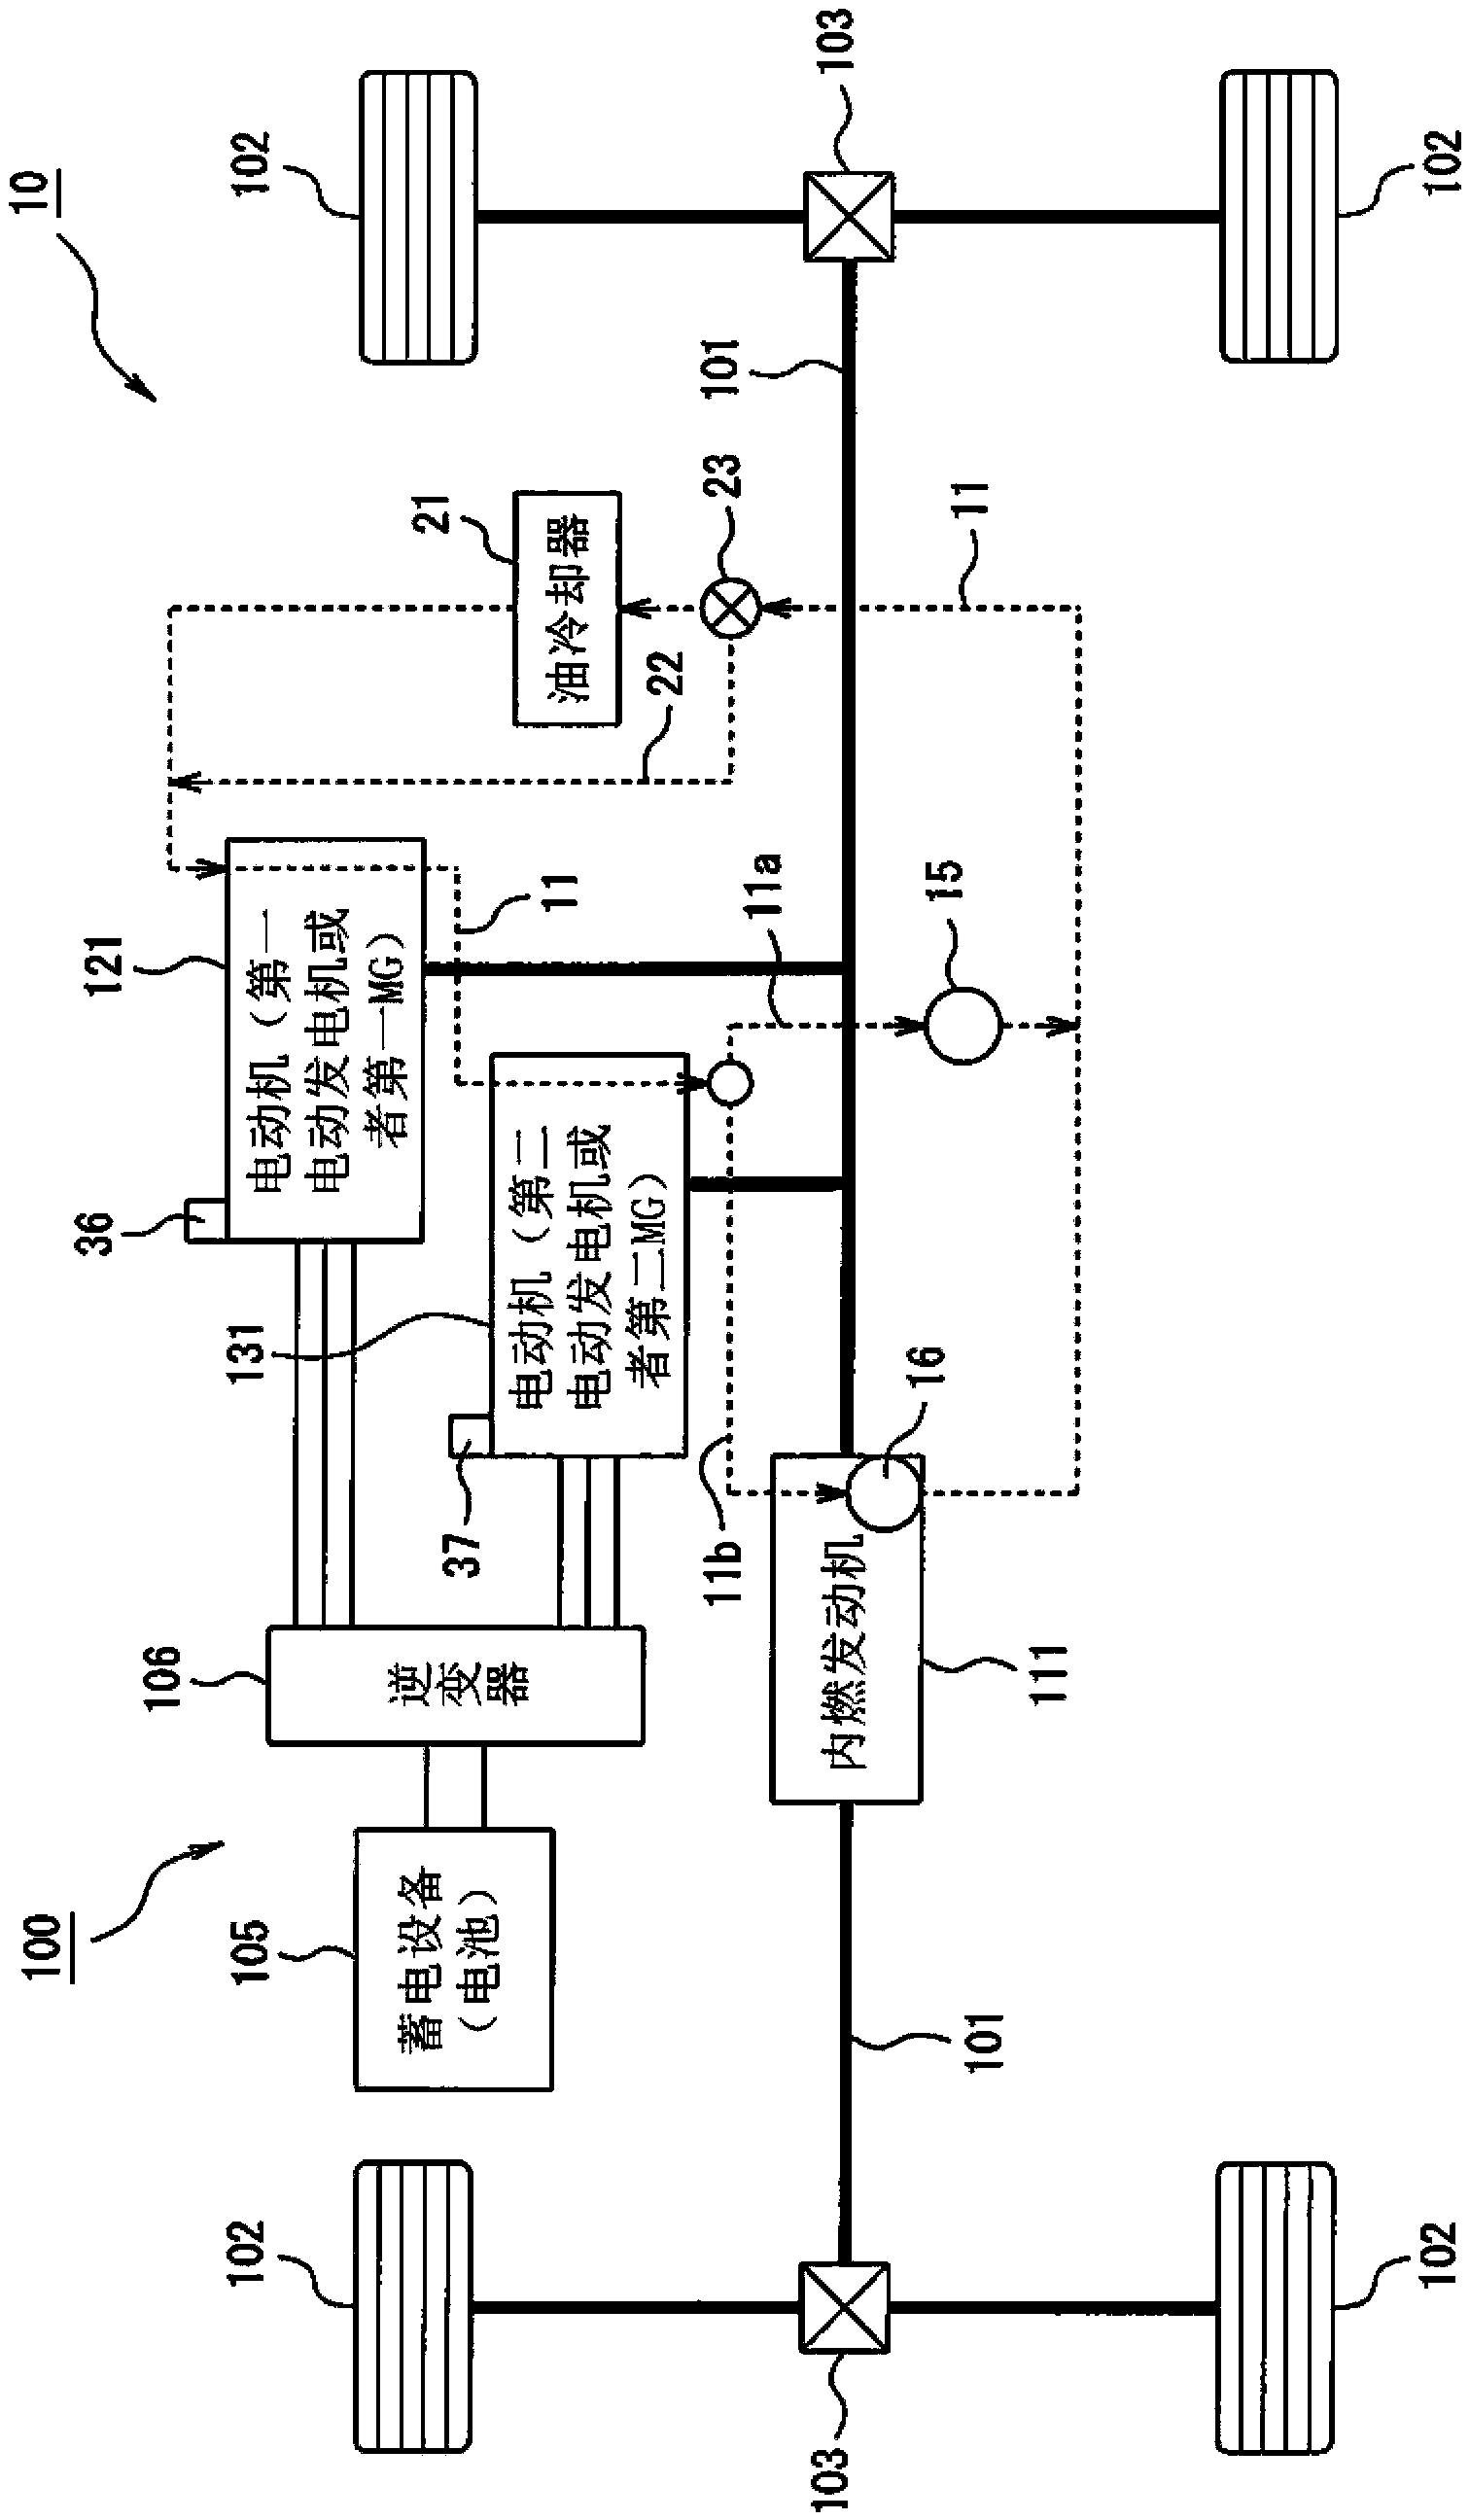 Oil circulation system for electric motor in a hybrid electric vehicle